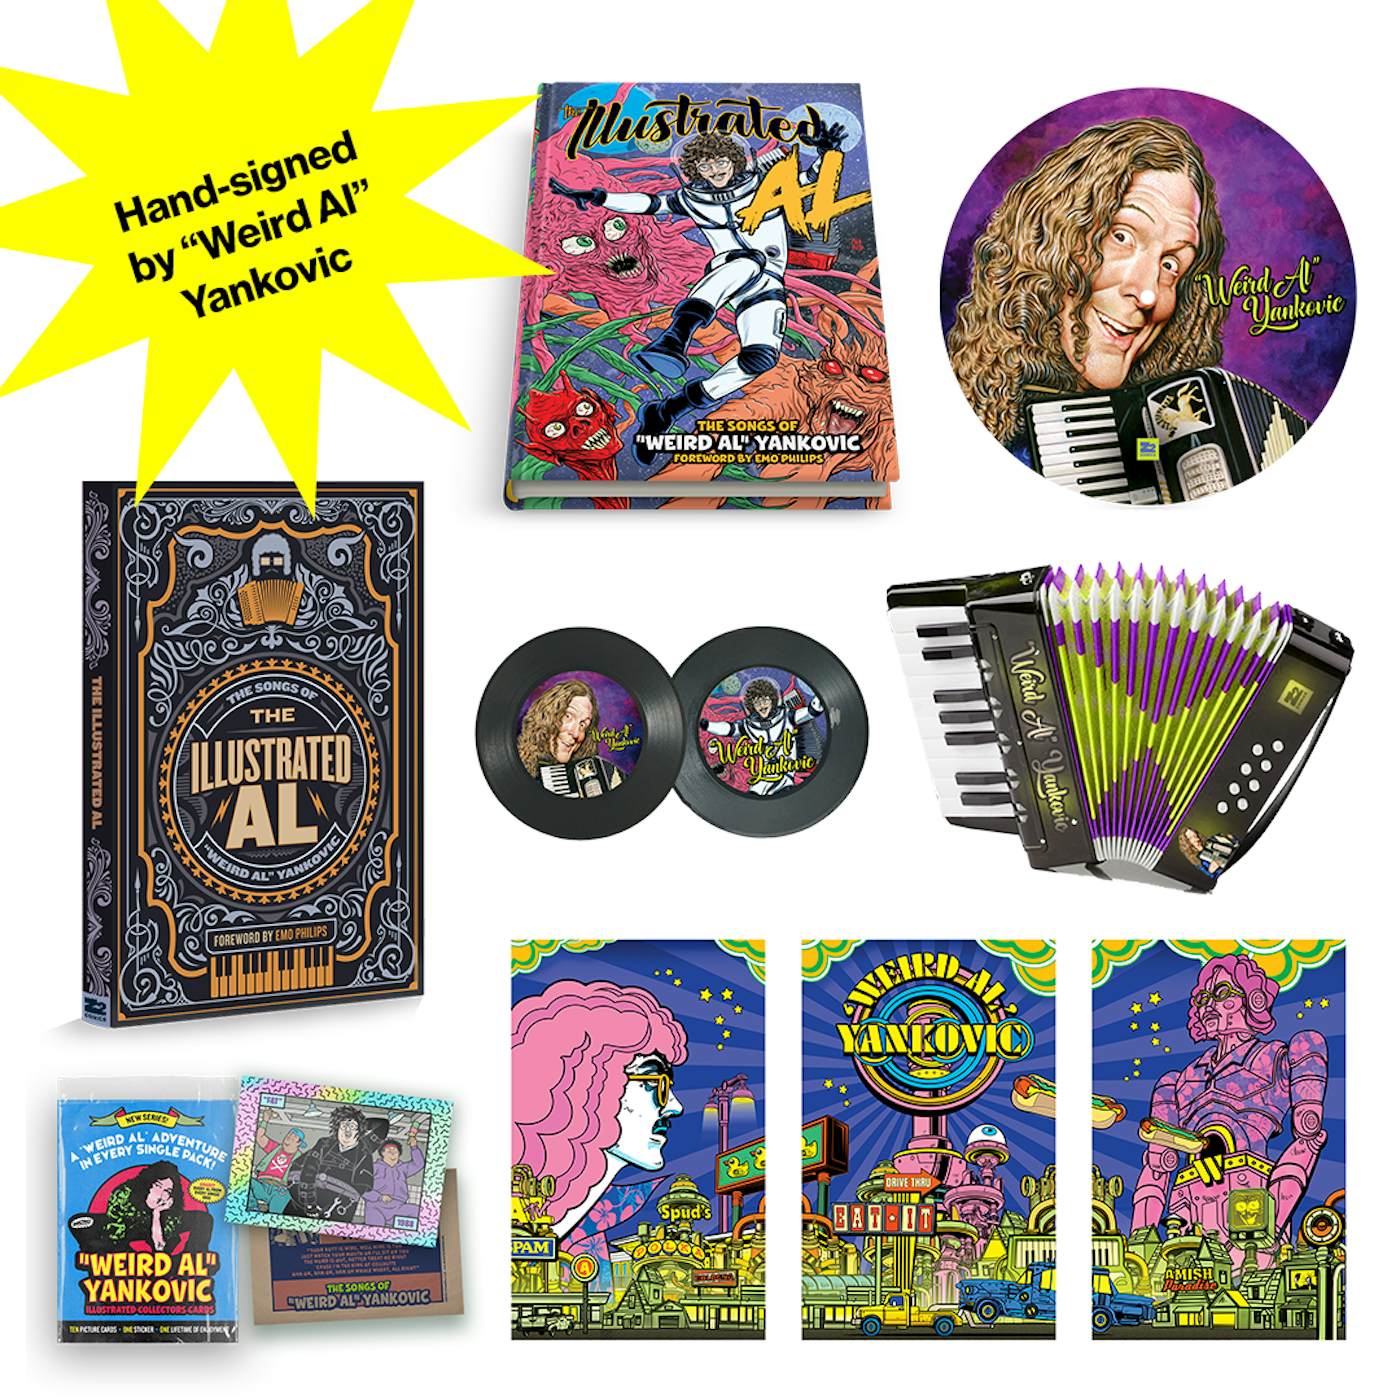 The Illustrated Al: The Songs of “"Weird Al" Yankovic” Yankovic - SIGNED Super Deluxe Bundle